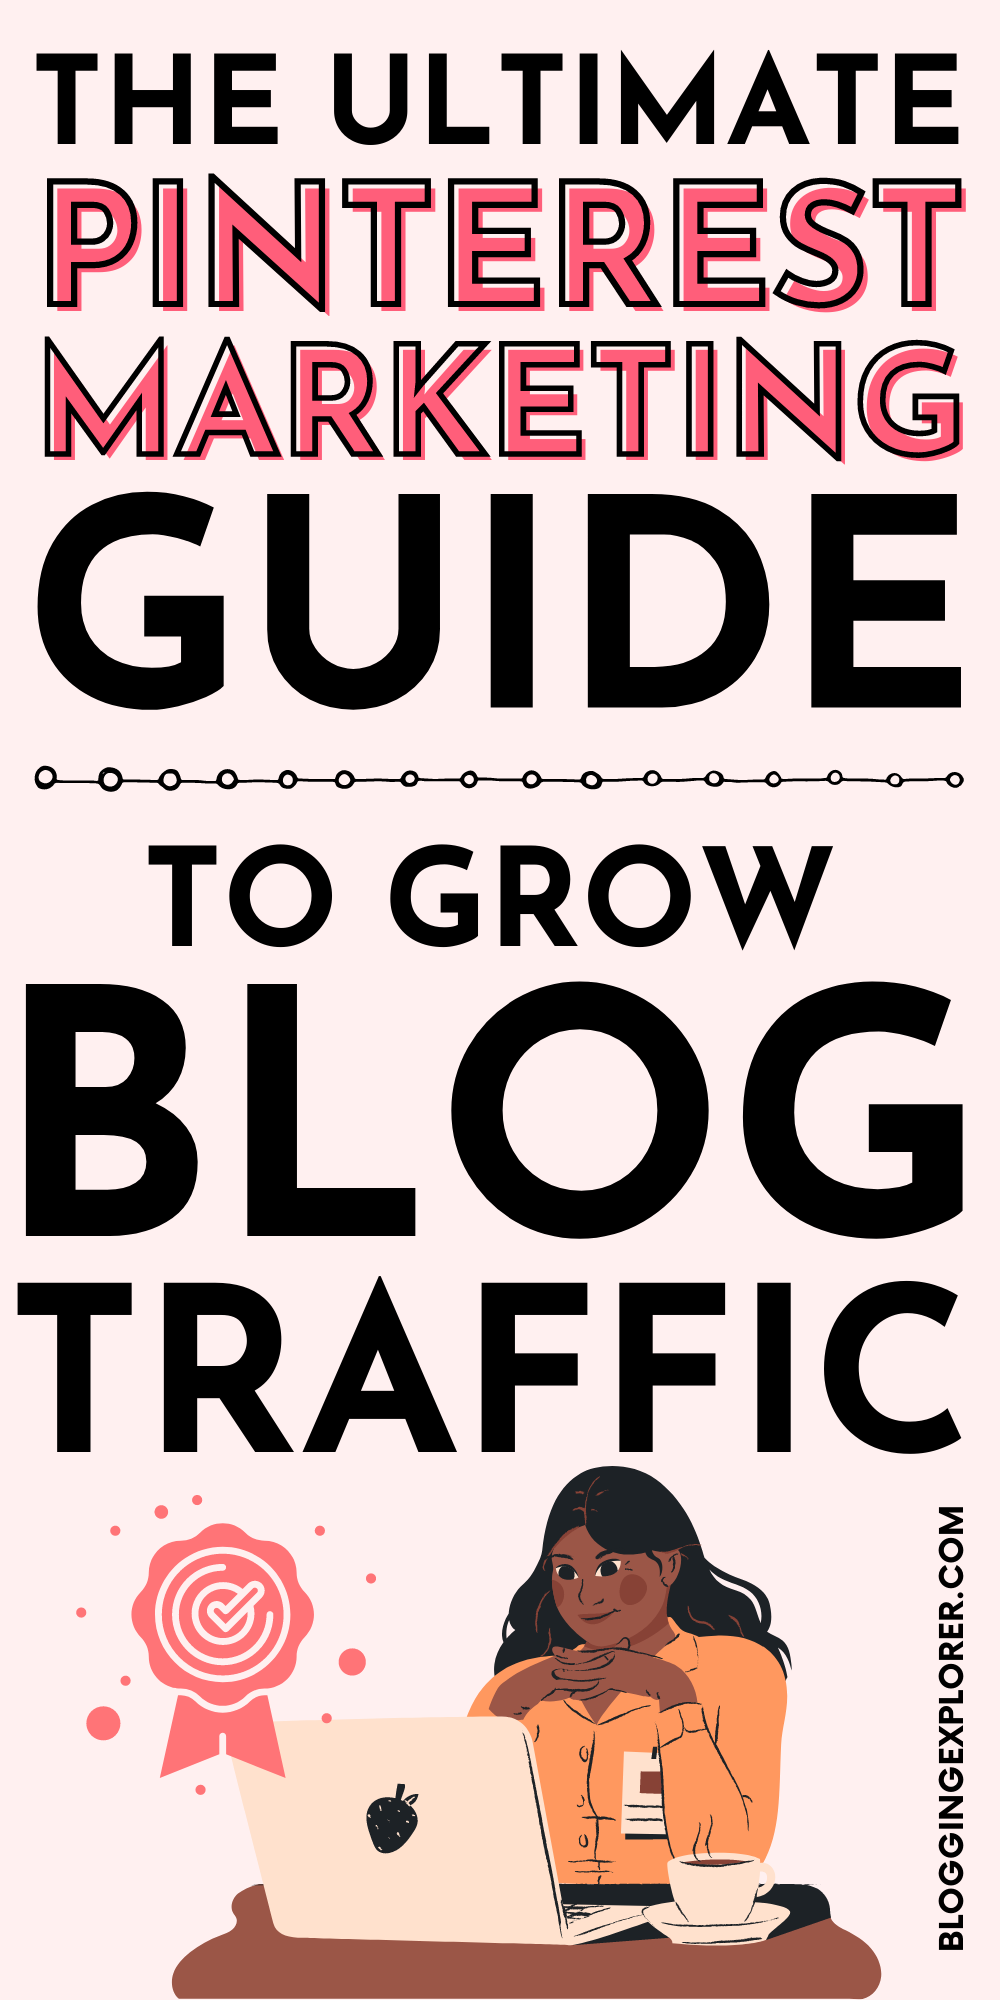 The ultimate Pinterest marketing guide to grow blog traffic